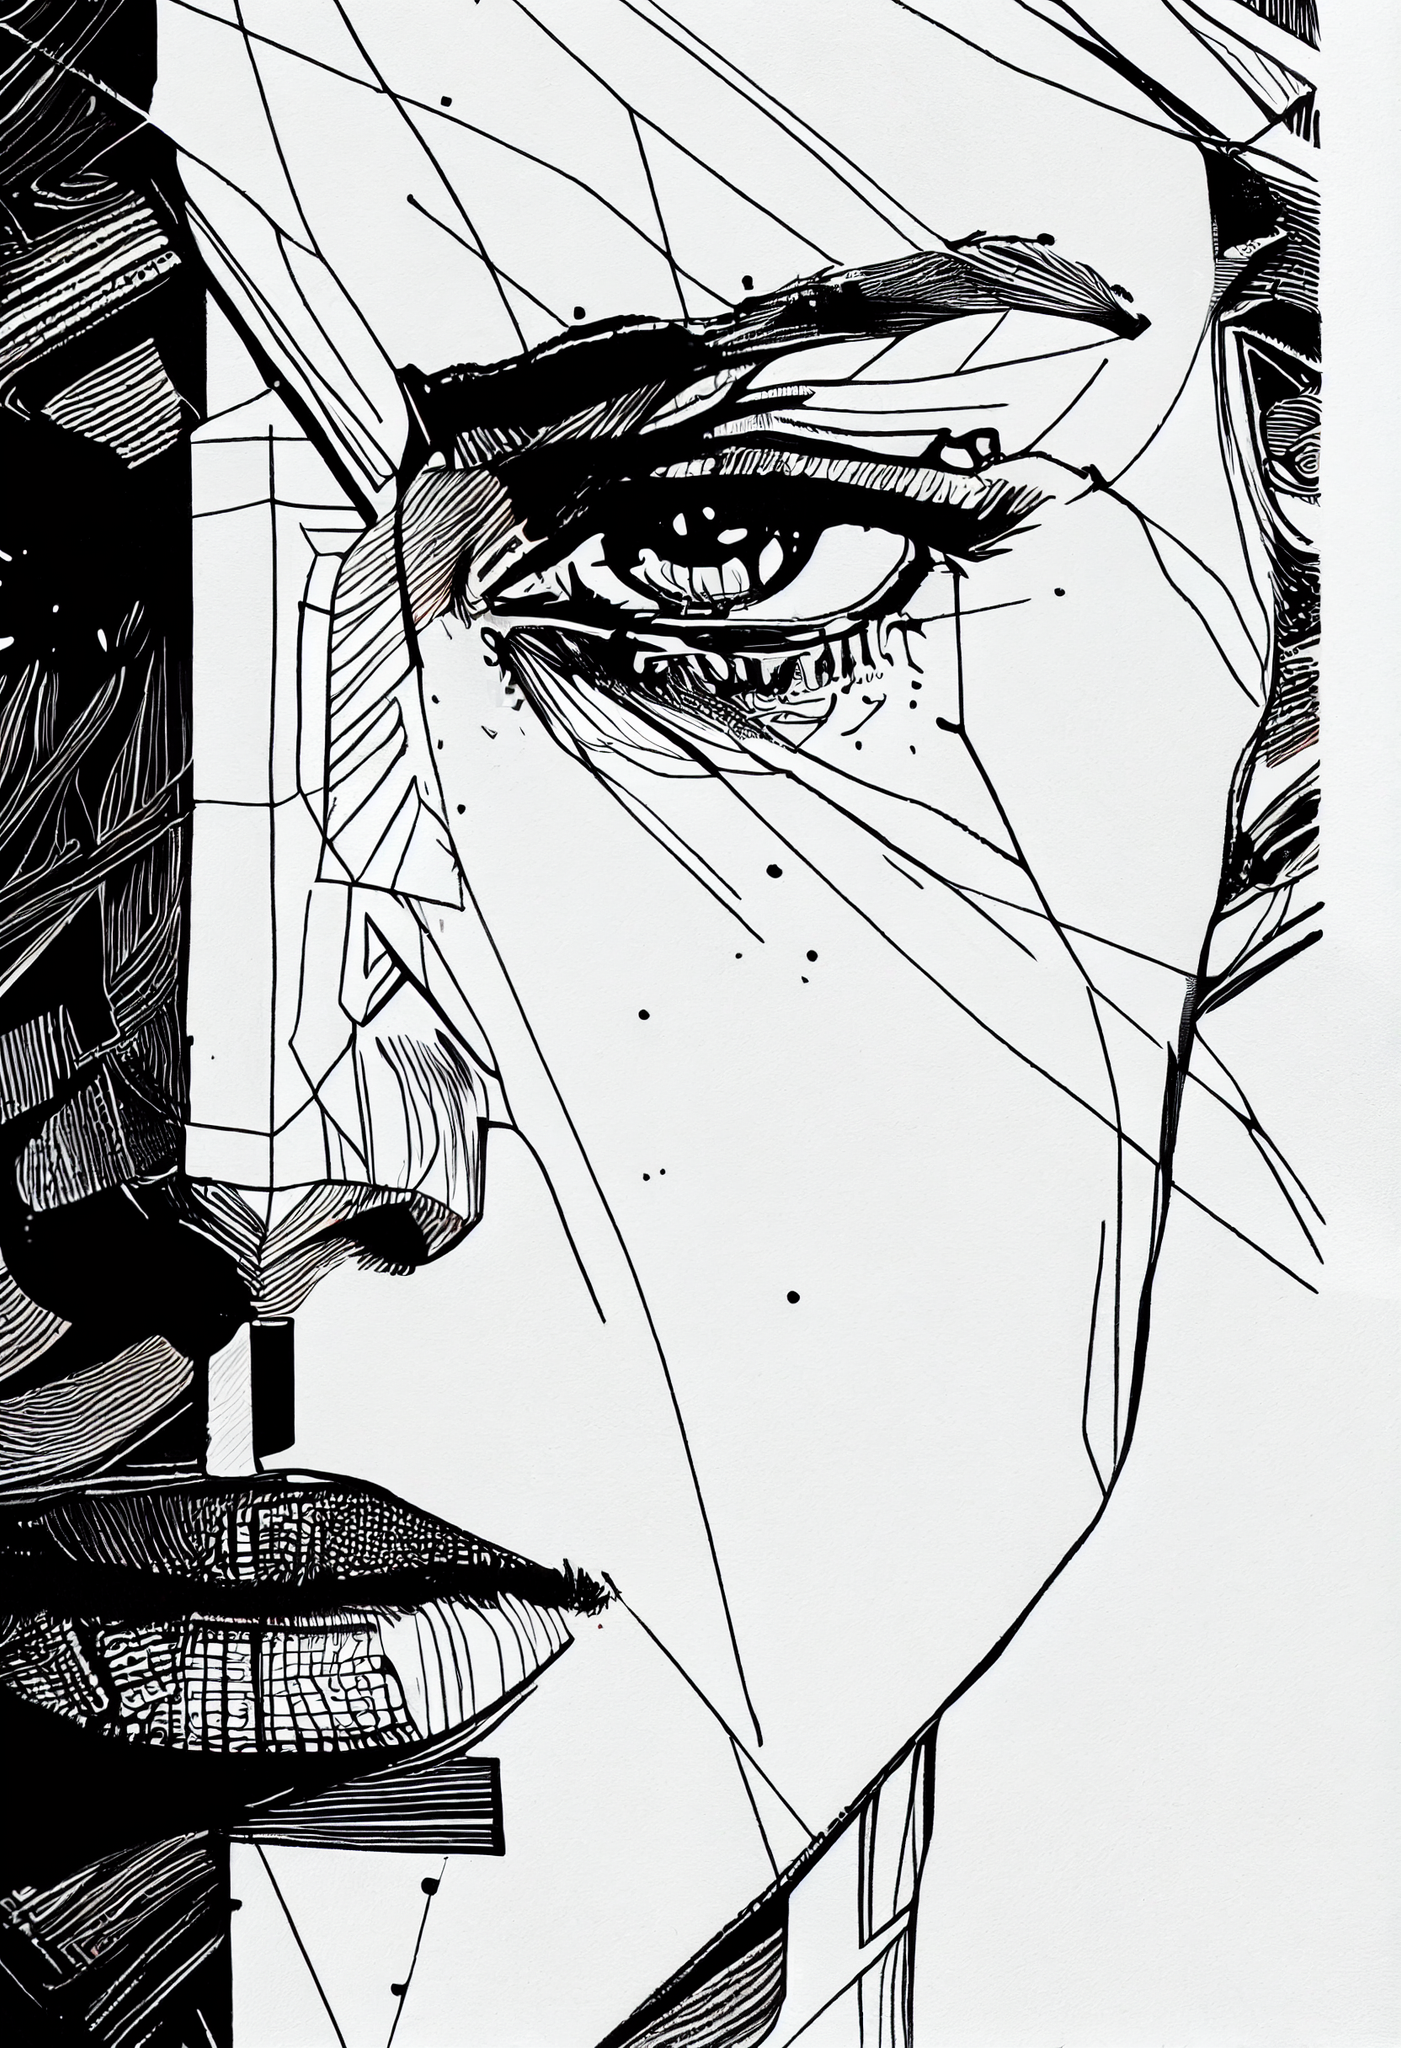 Minimalist Black and White Line Art Print of a Woman's Face from the Front